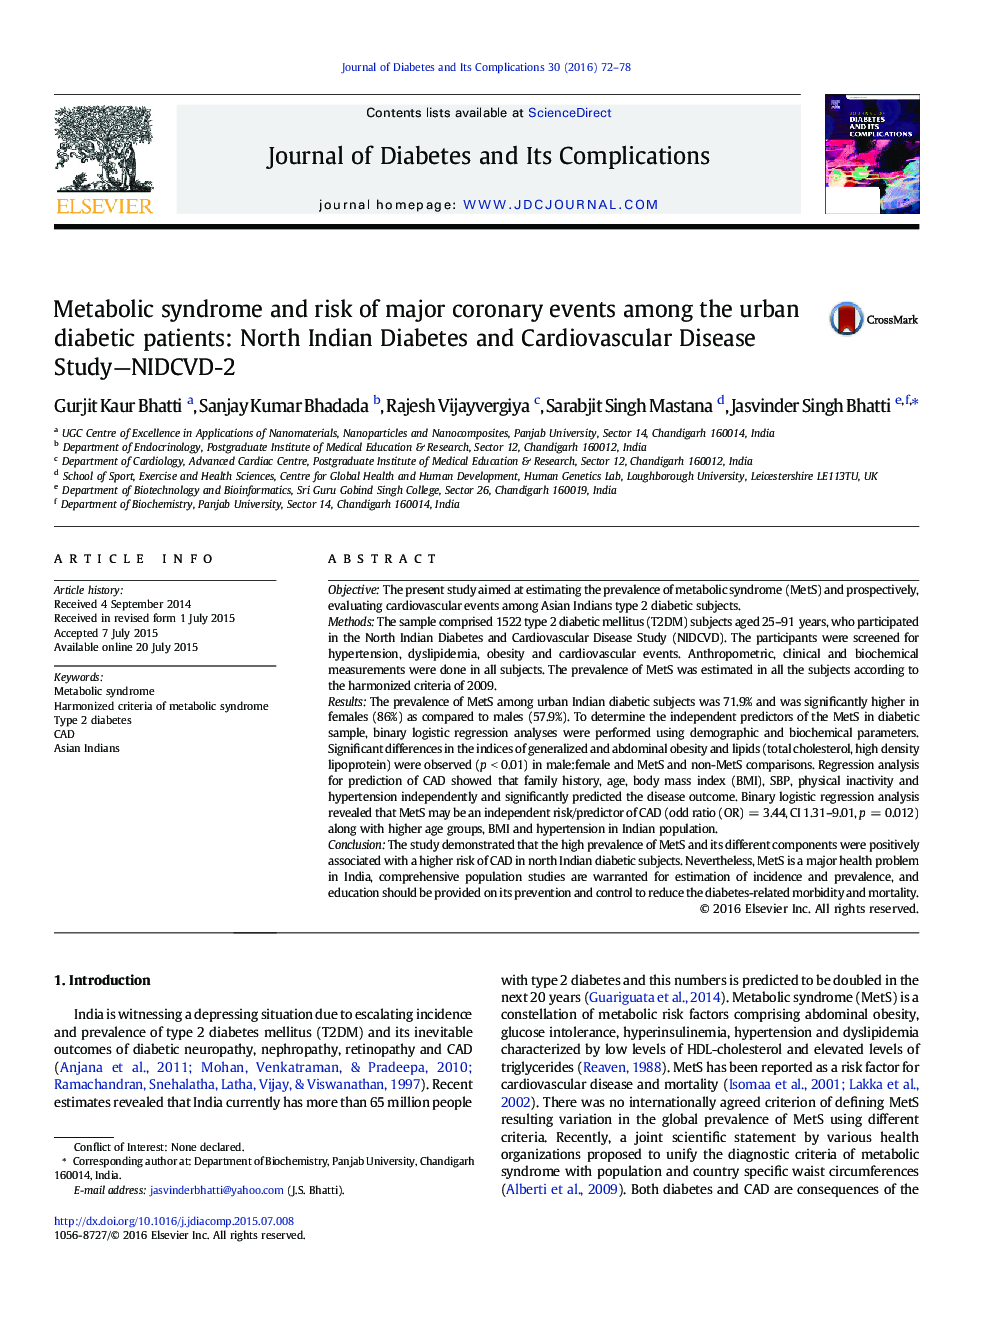 Metabolic syndrome and risk of major coronary events among the urban diabetic patients: North Indian Diabetes and Cardiovascular Disease Study—NIDCVD-2 